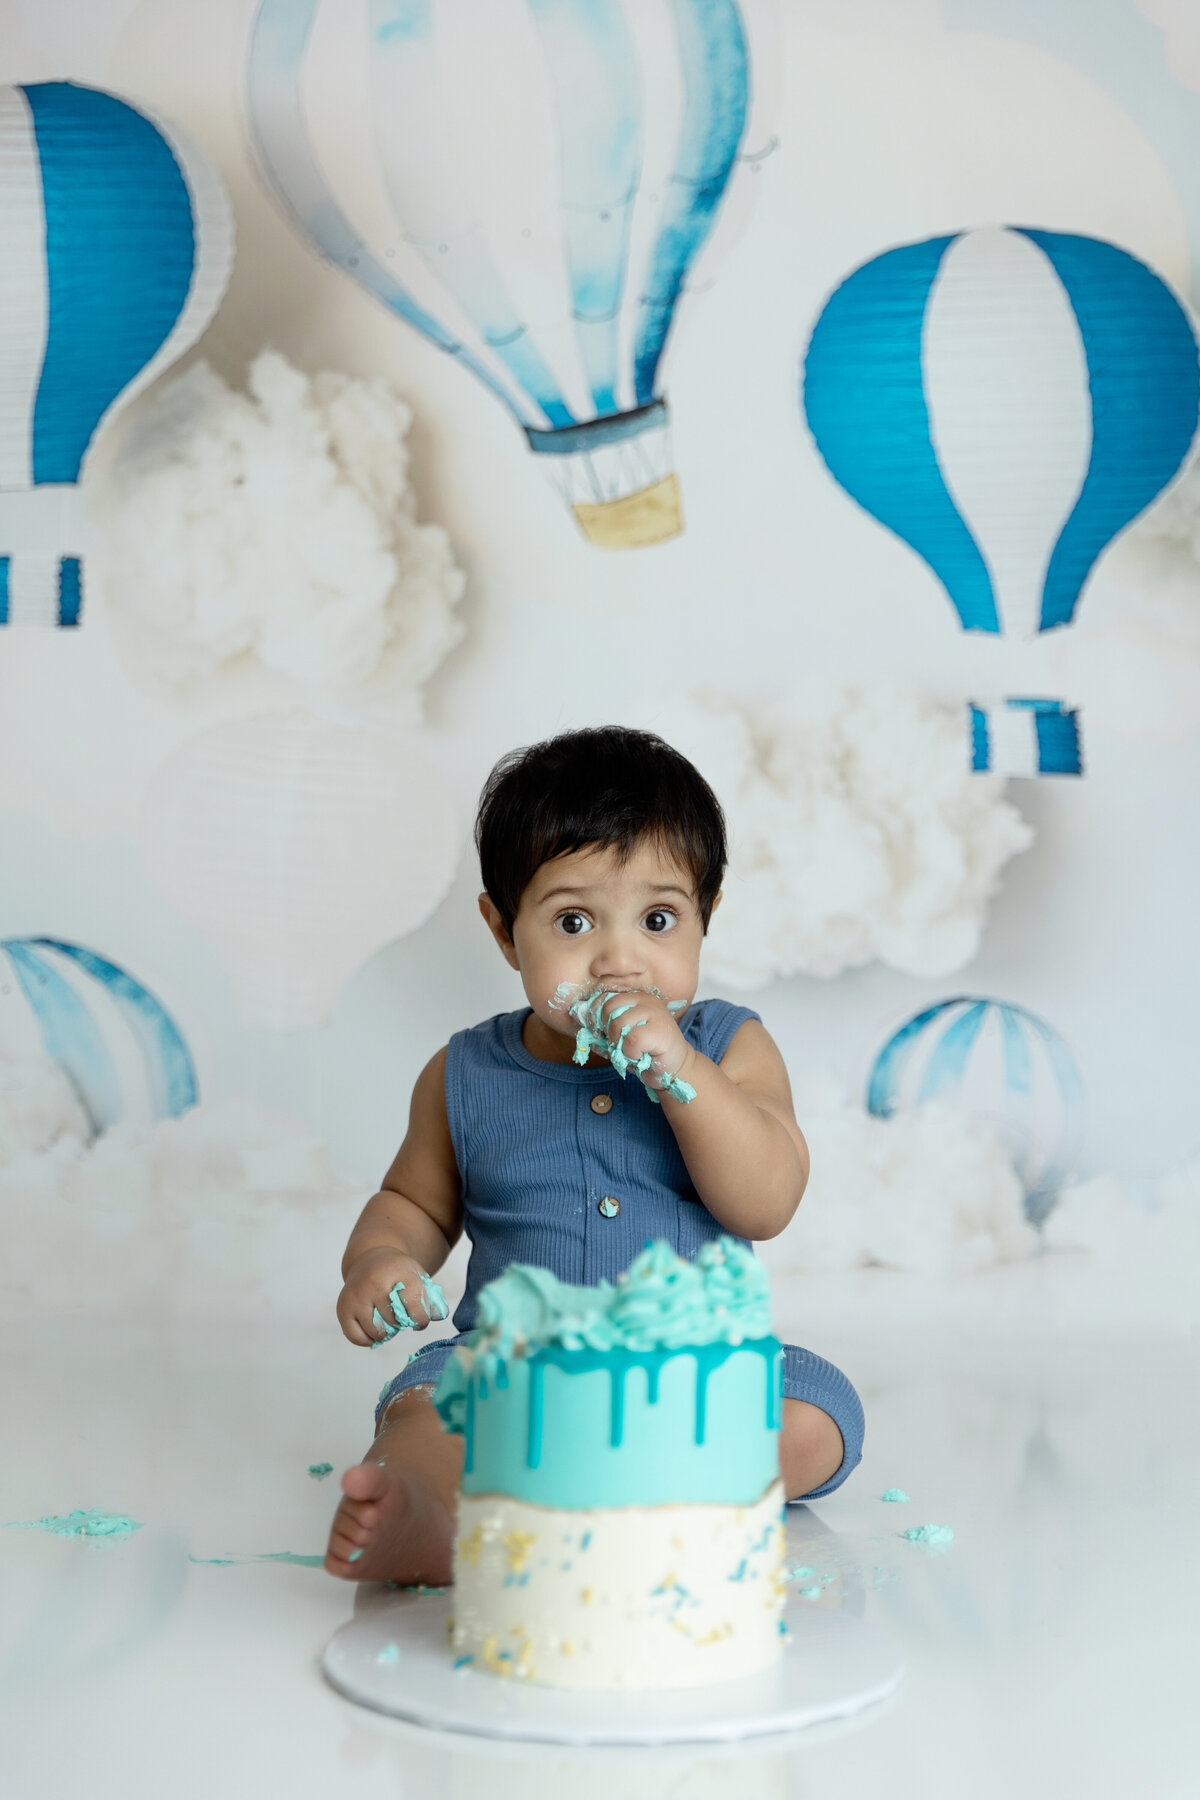 A toddler in a blue onesie makes a silly face while eating cake in a studio